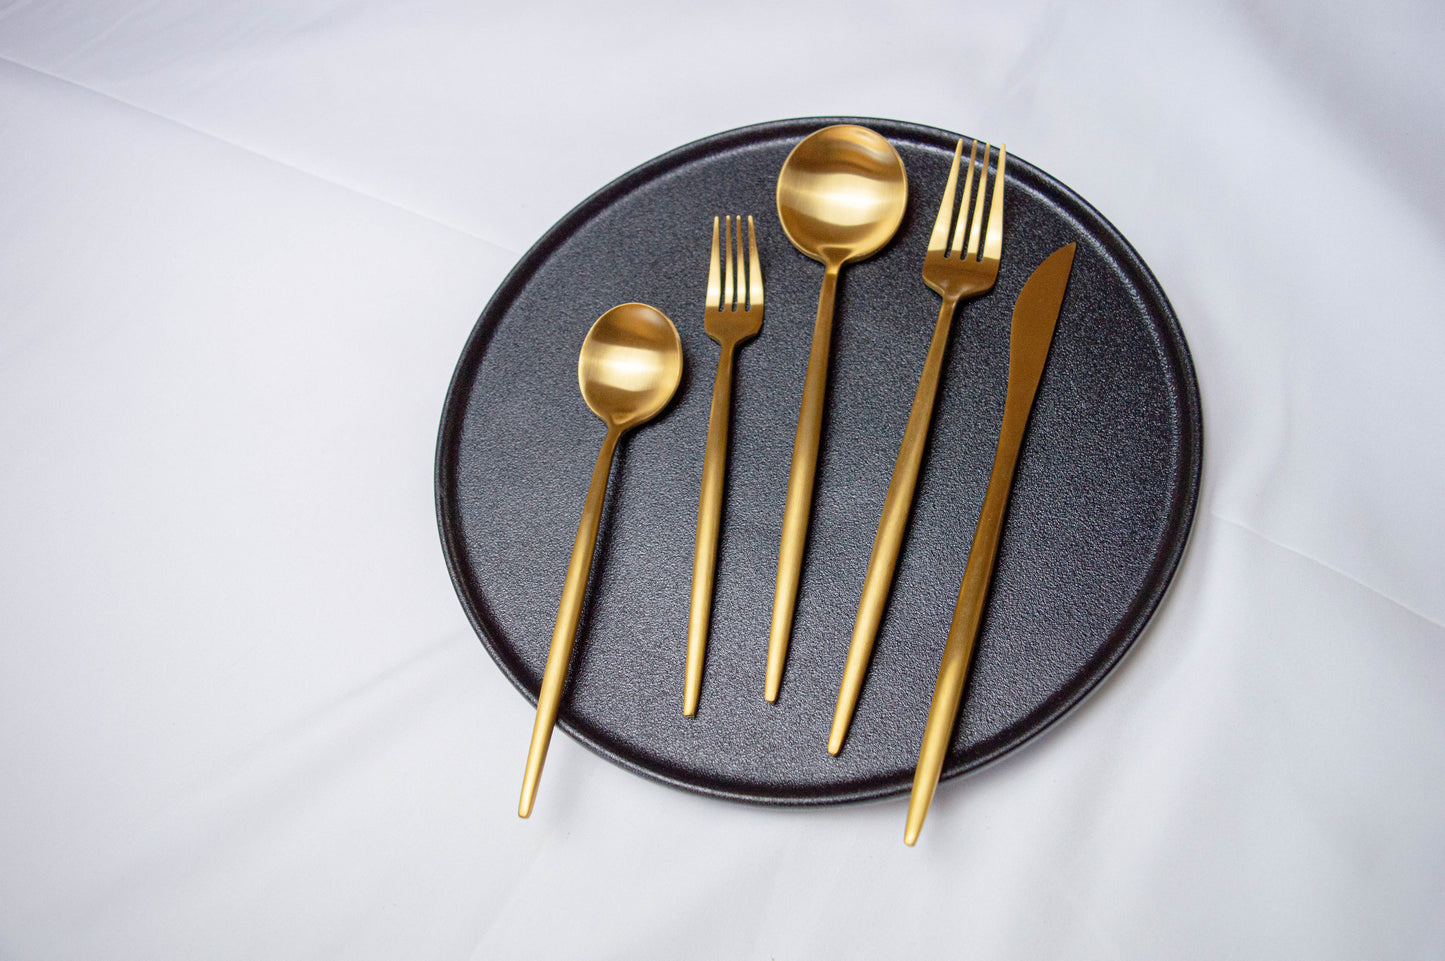 gold golden serving utensils gifts dinnerware accessories serving spoons and fork spatula of 2 shiny matte gold salad server cubiertos de acero inoxidable juegos de vajilla hosting party essentials flatware 1810 stainless steel home essentials kitchen ware serveware anniversary at home home party gifts for new homeowners flatware set silverware korean utensils set oriental gifts japanese chinses culture